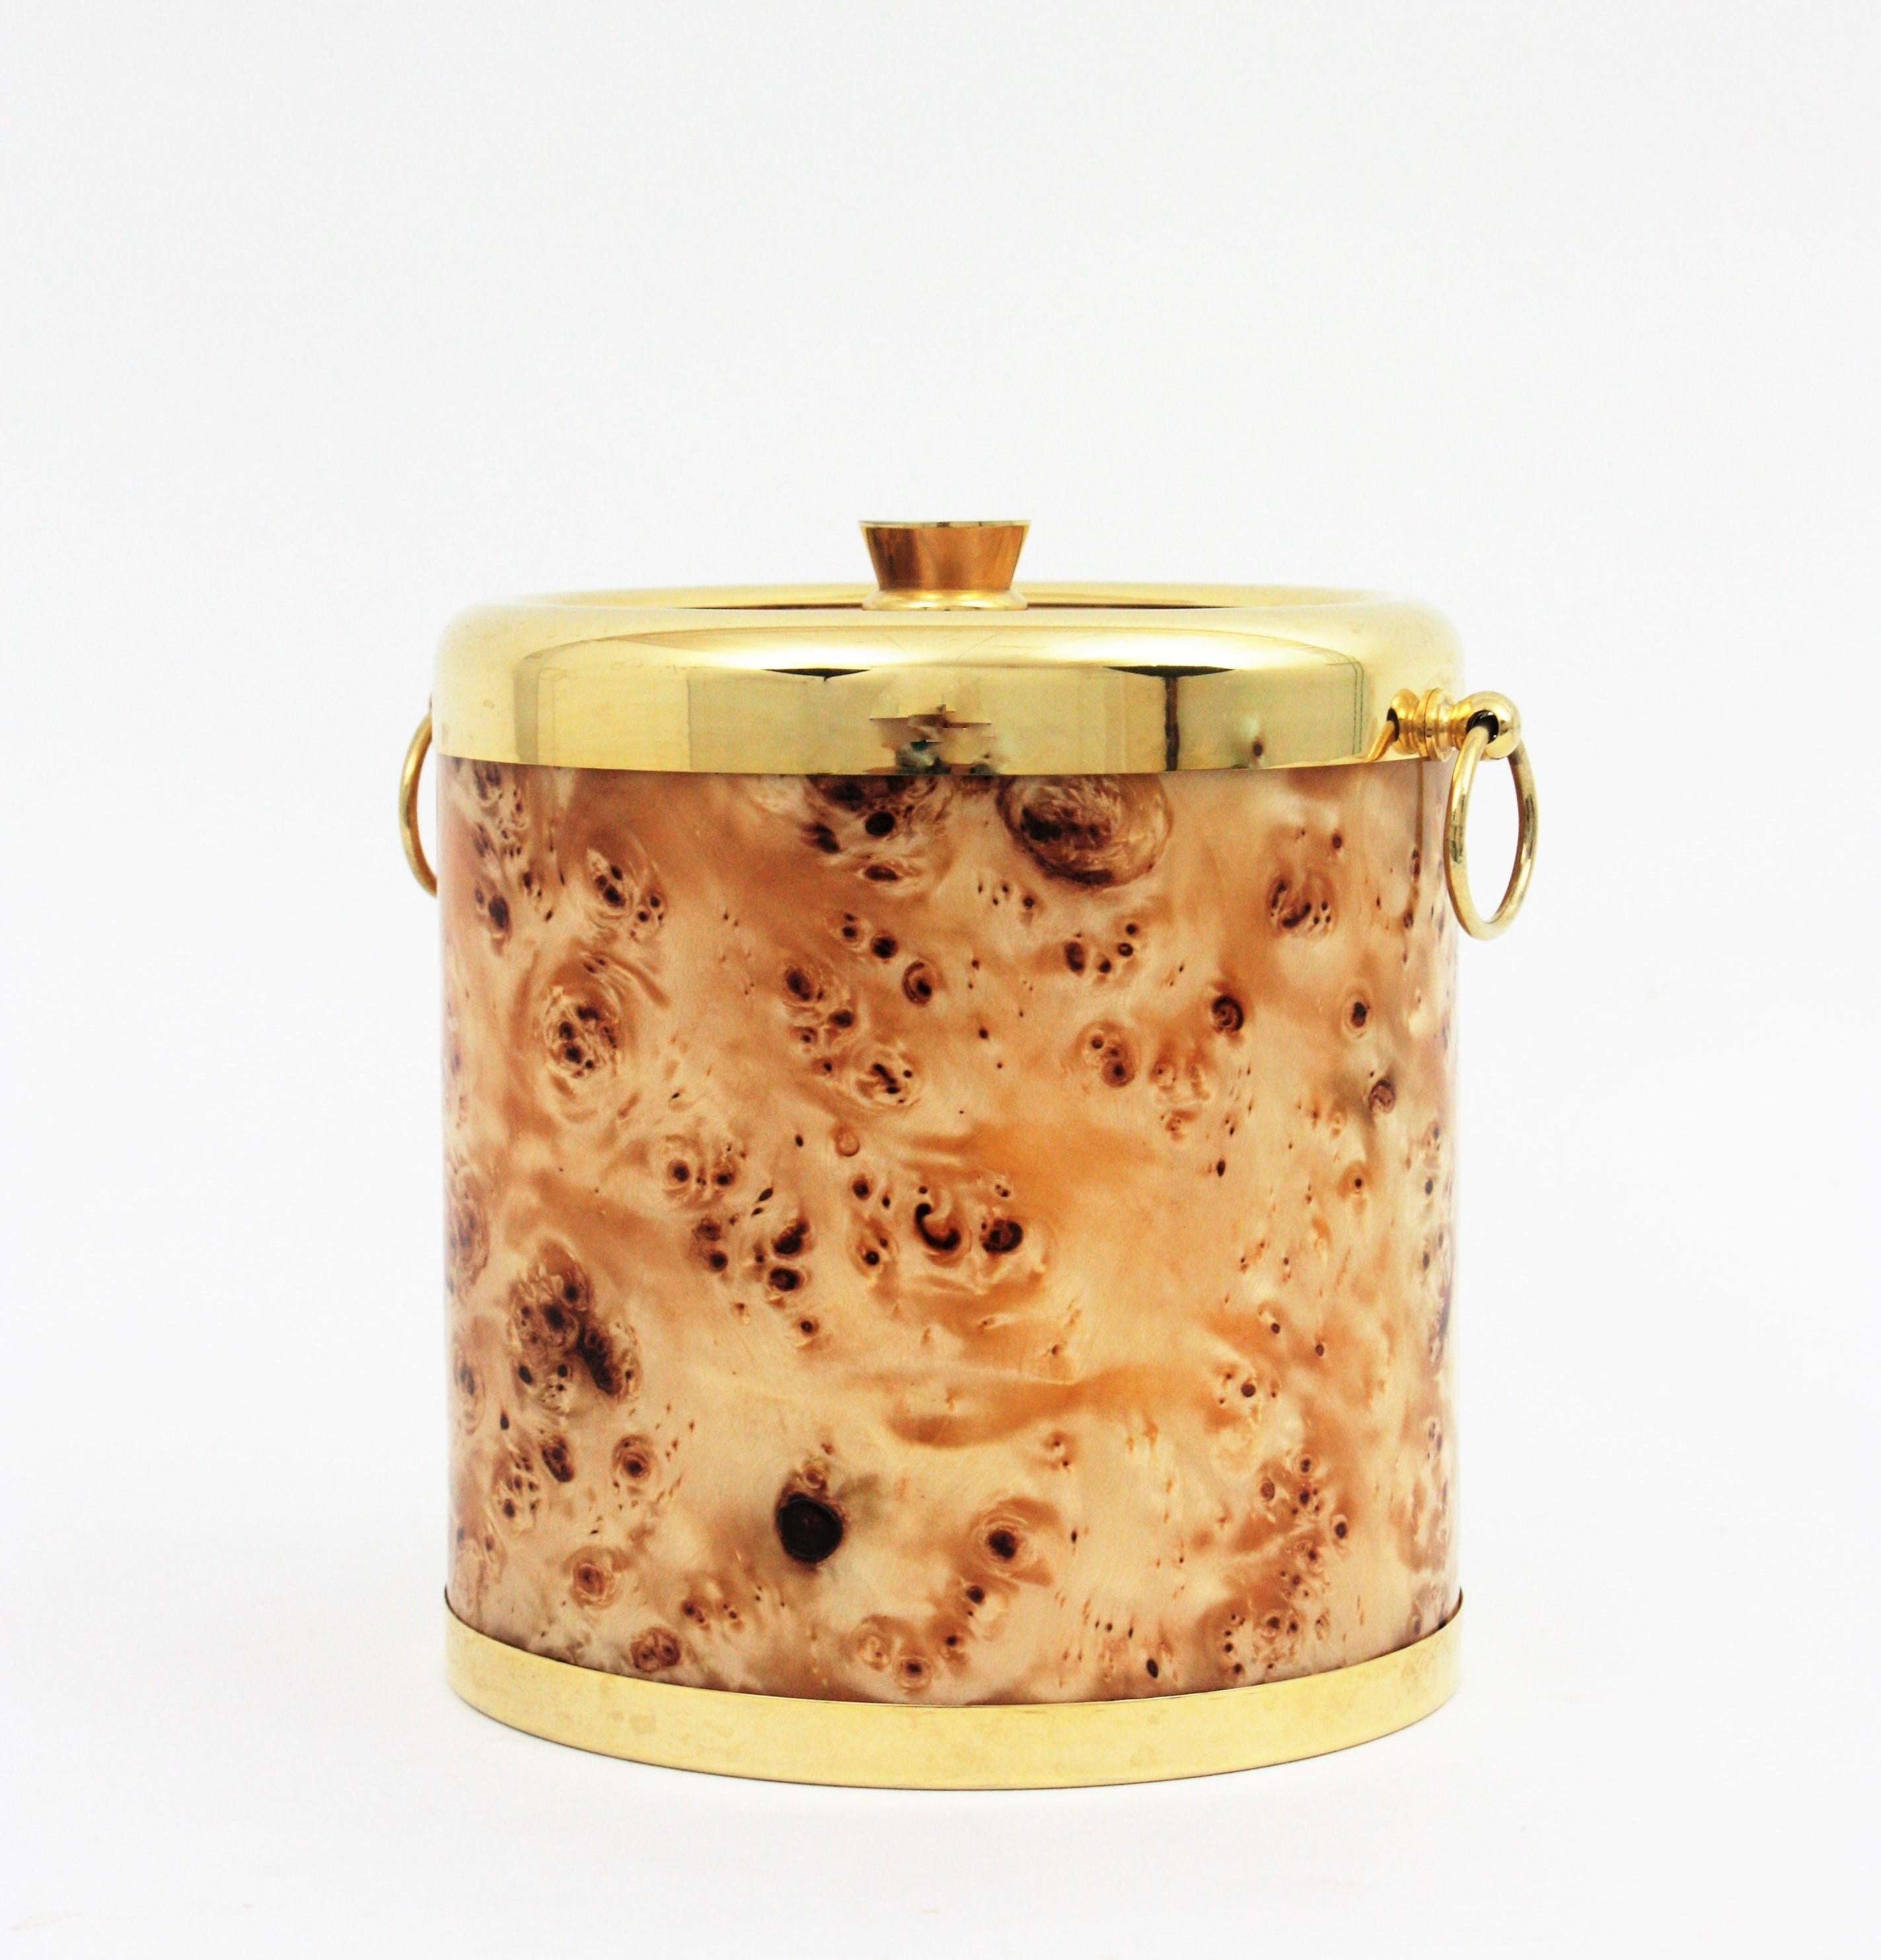 Midcentury Lucite Burl Wood and Brass Italian Ice Bucket, 1960s For Sale 2